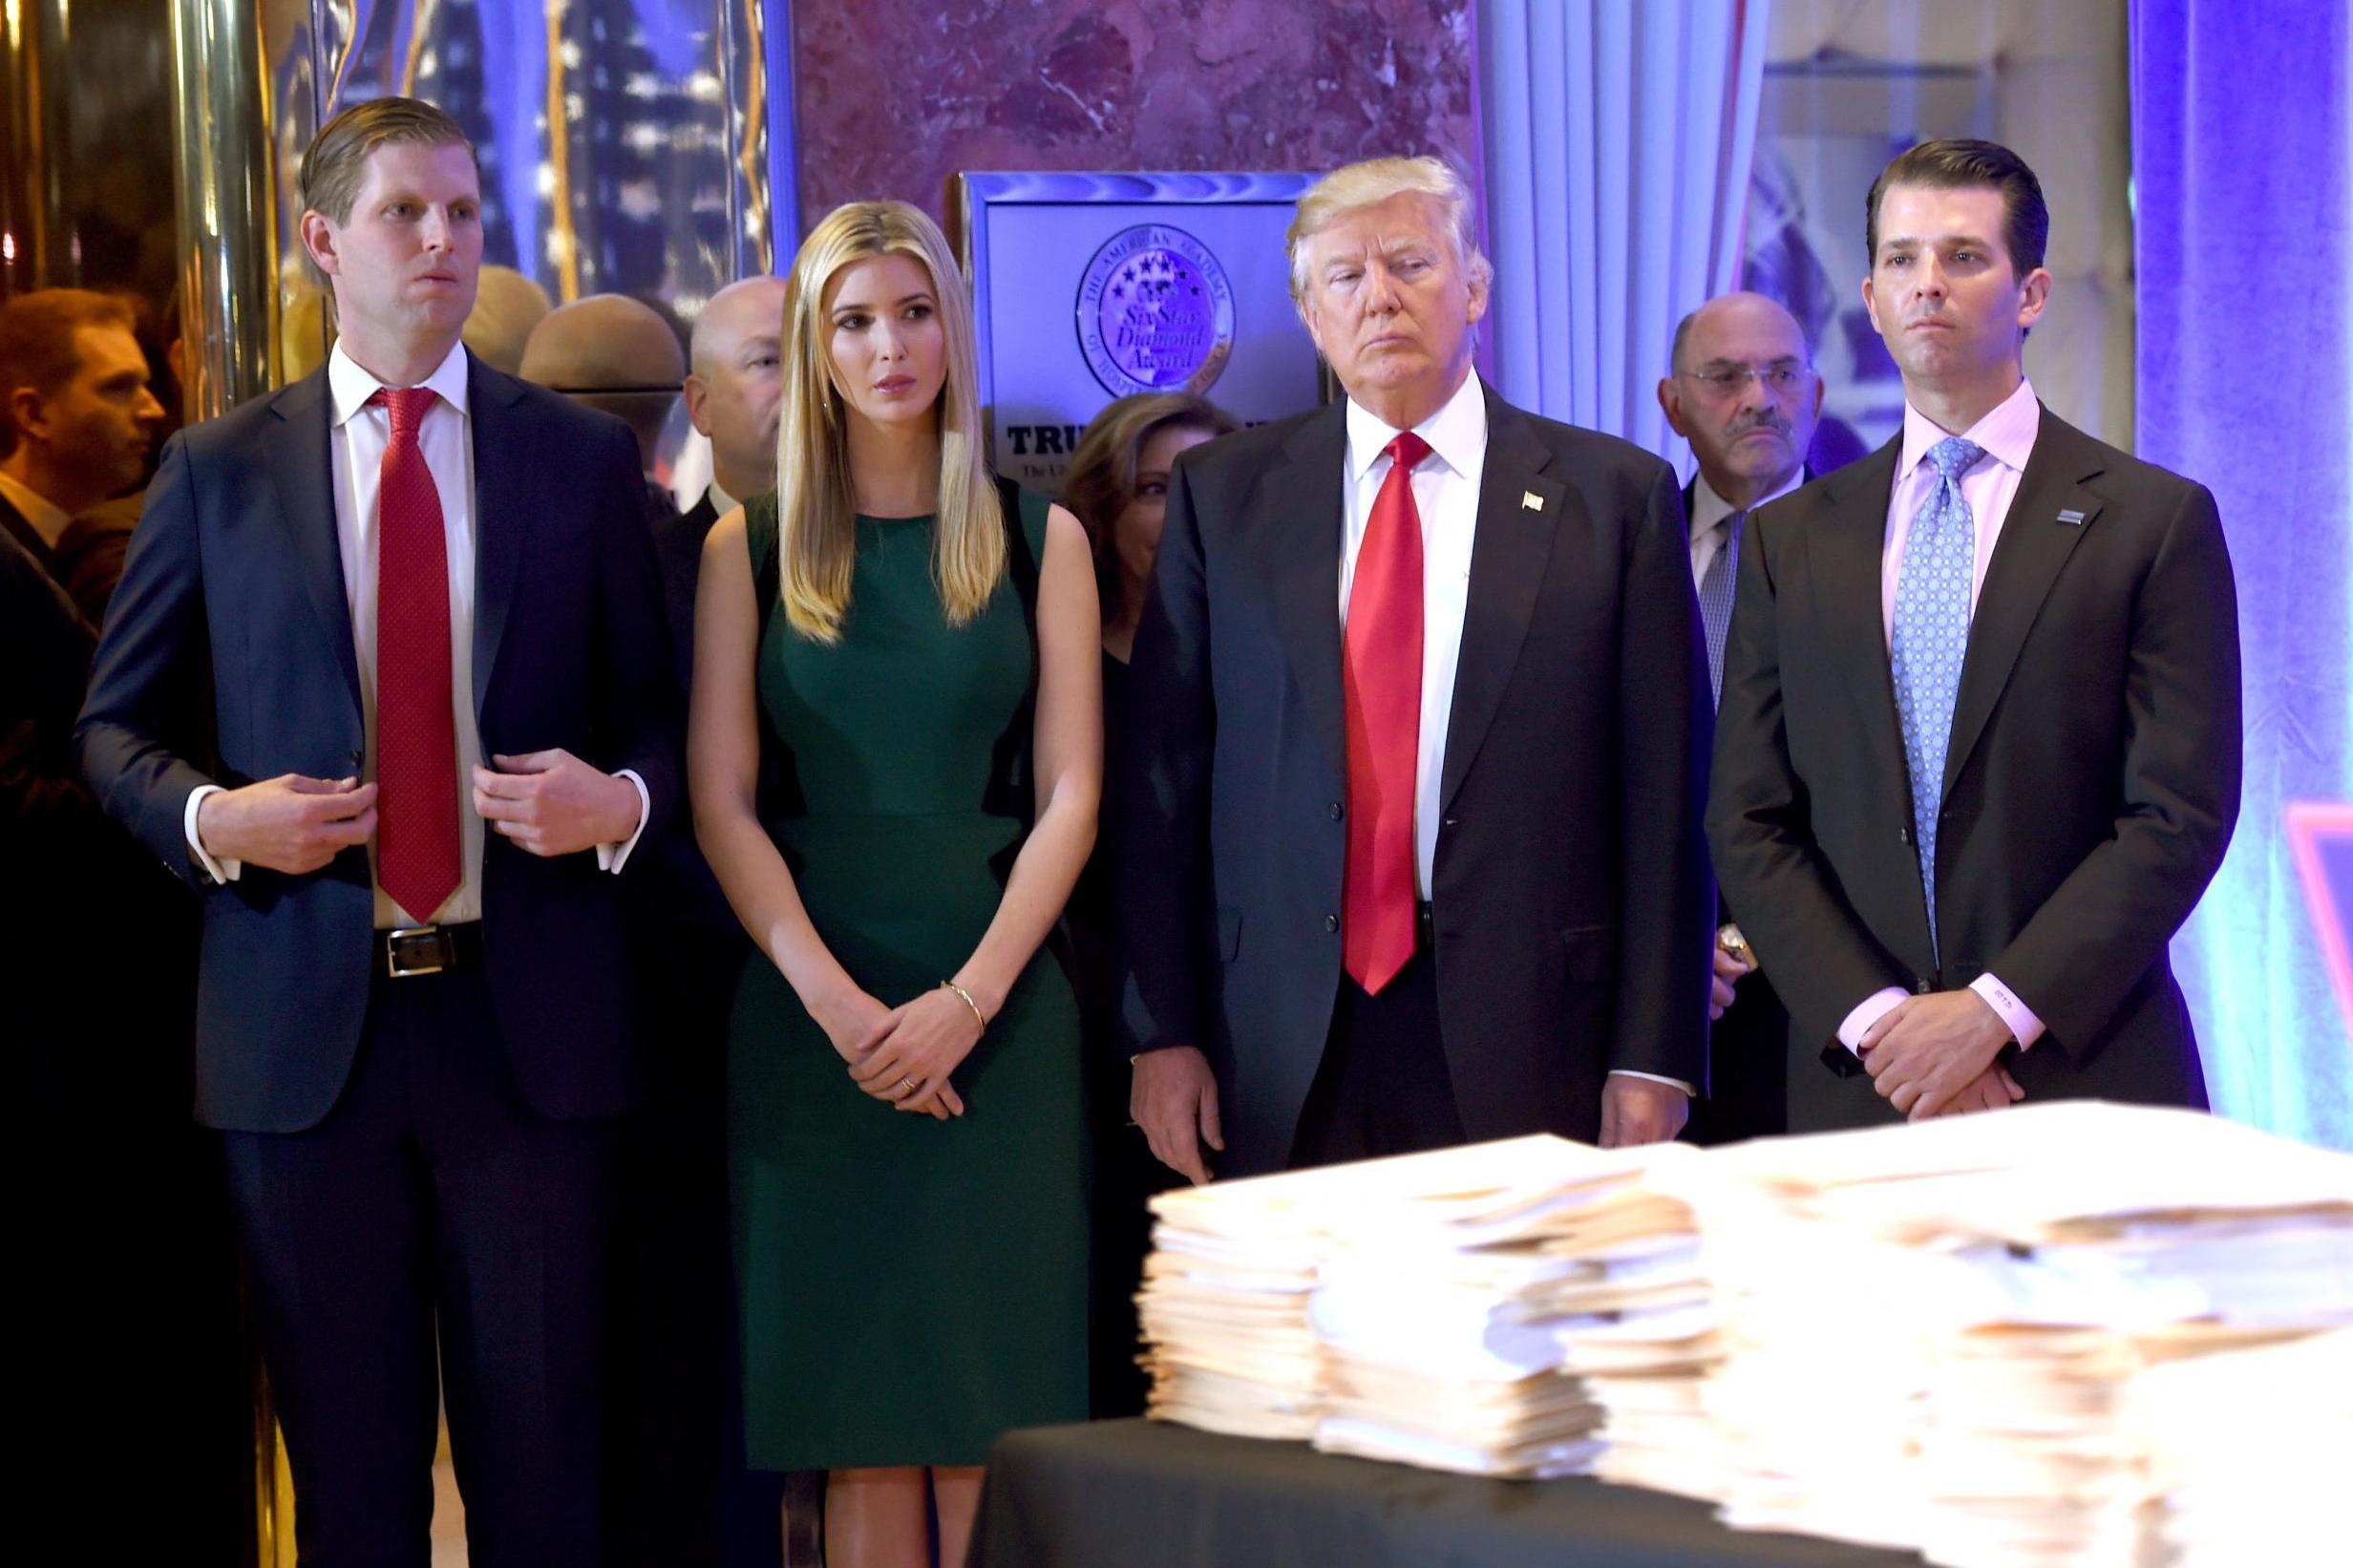 A royal affair: Donald Trump plans to bring all of his children on his upcoming trip to the UK